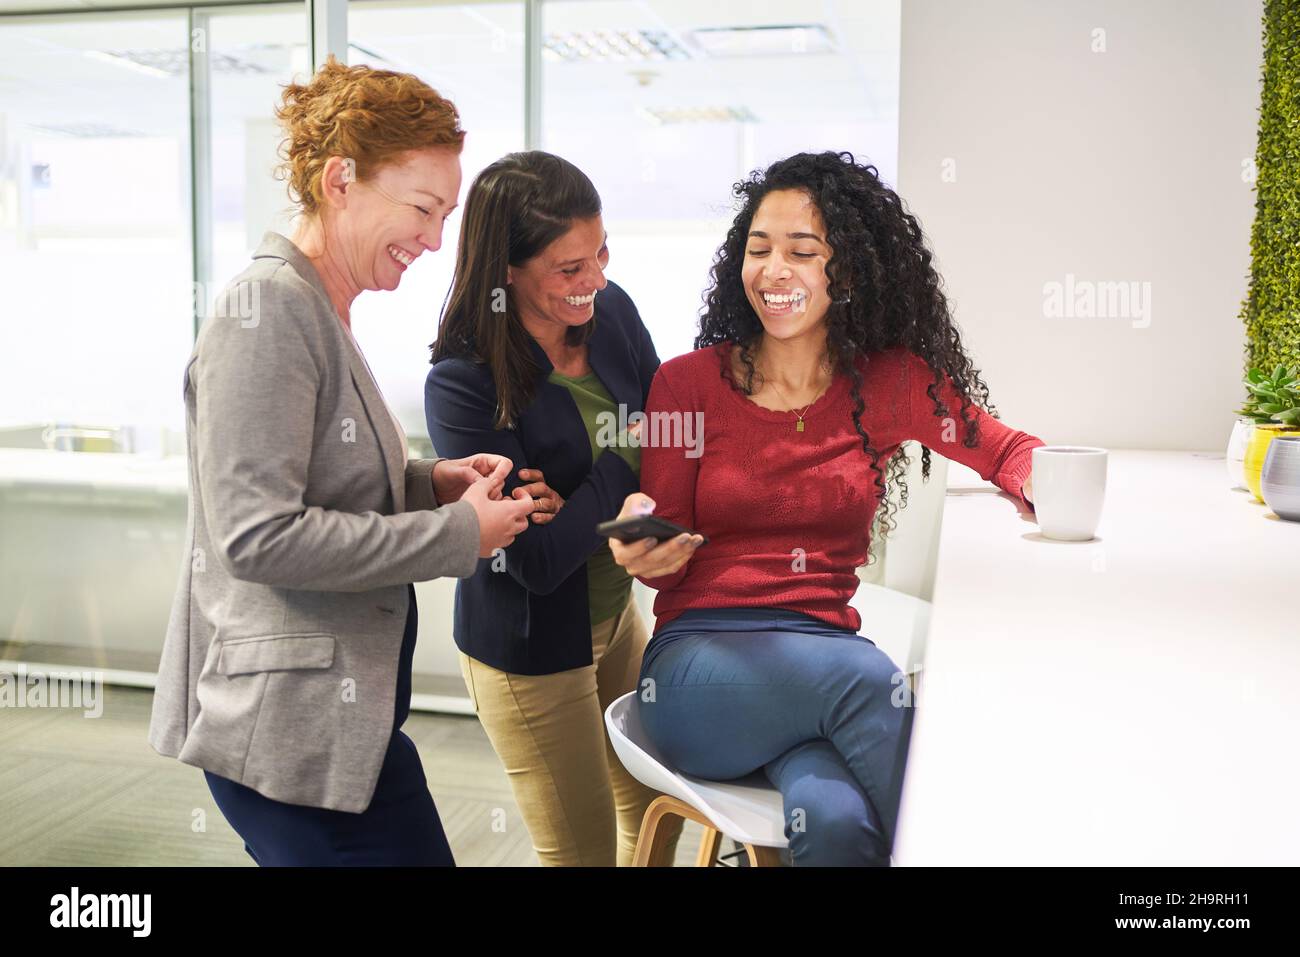 Women laugh together over a text message or email on their smartphones during a break Stock Photo